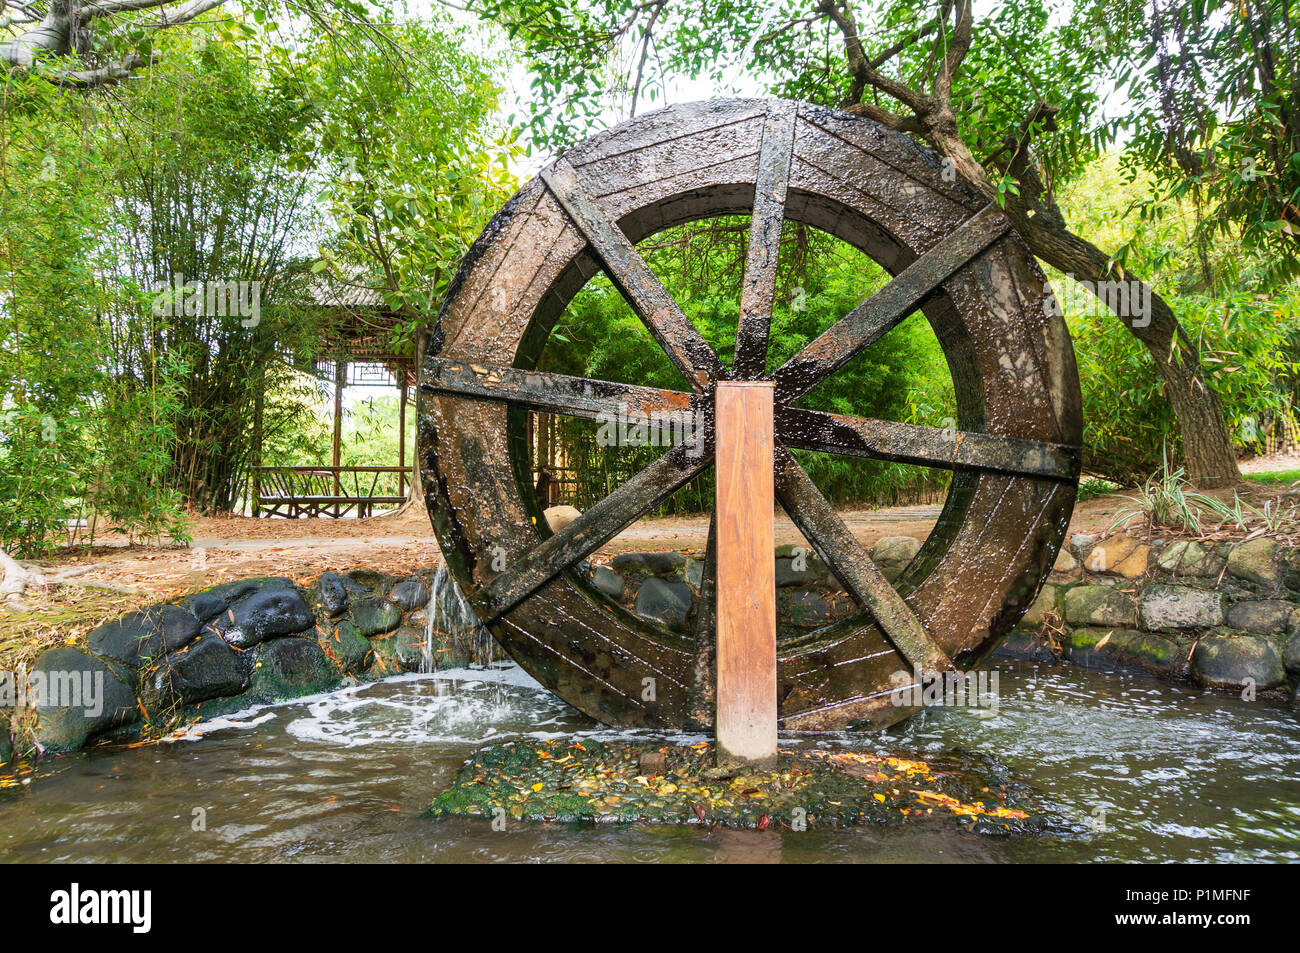 Wooden Wheel of Ancient Water Mill in Village Stock Photo